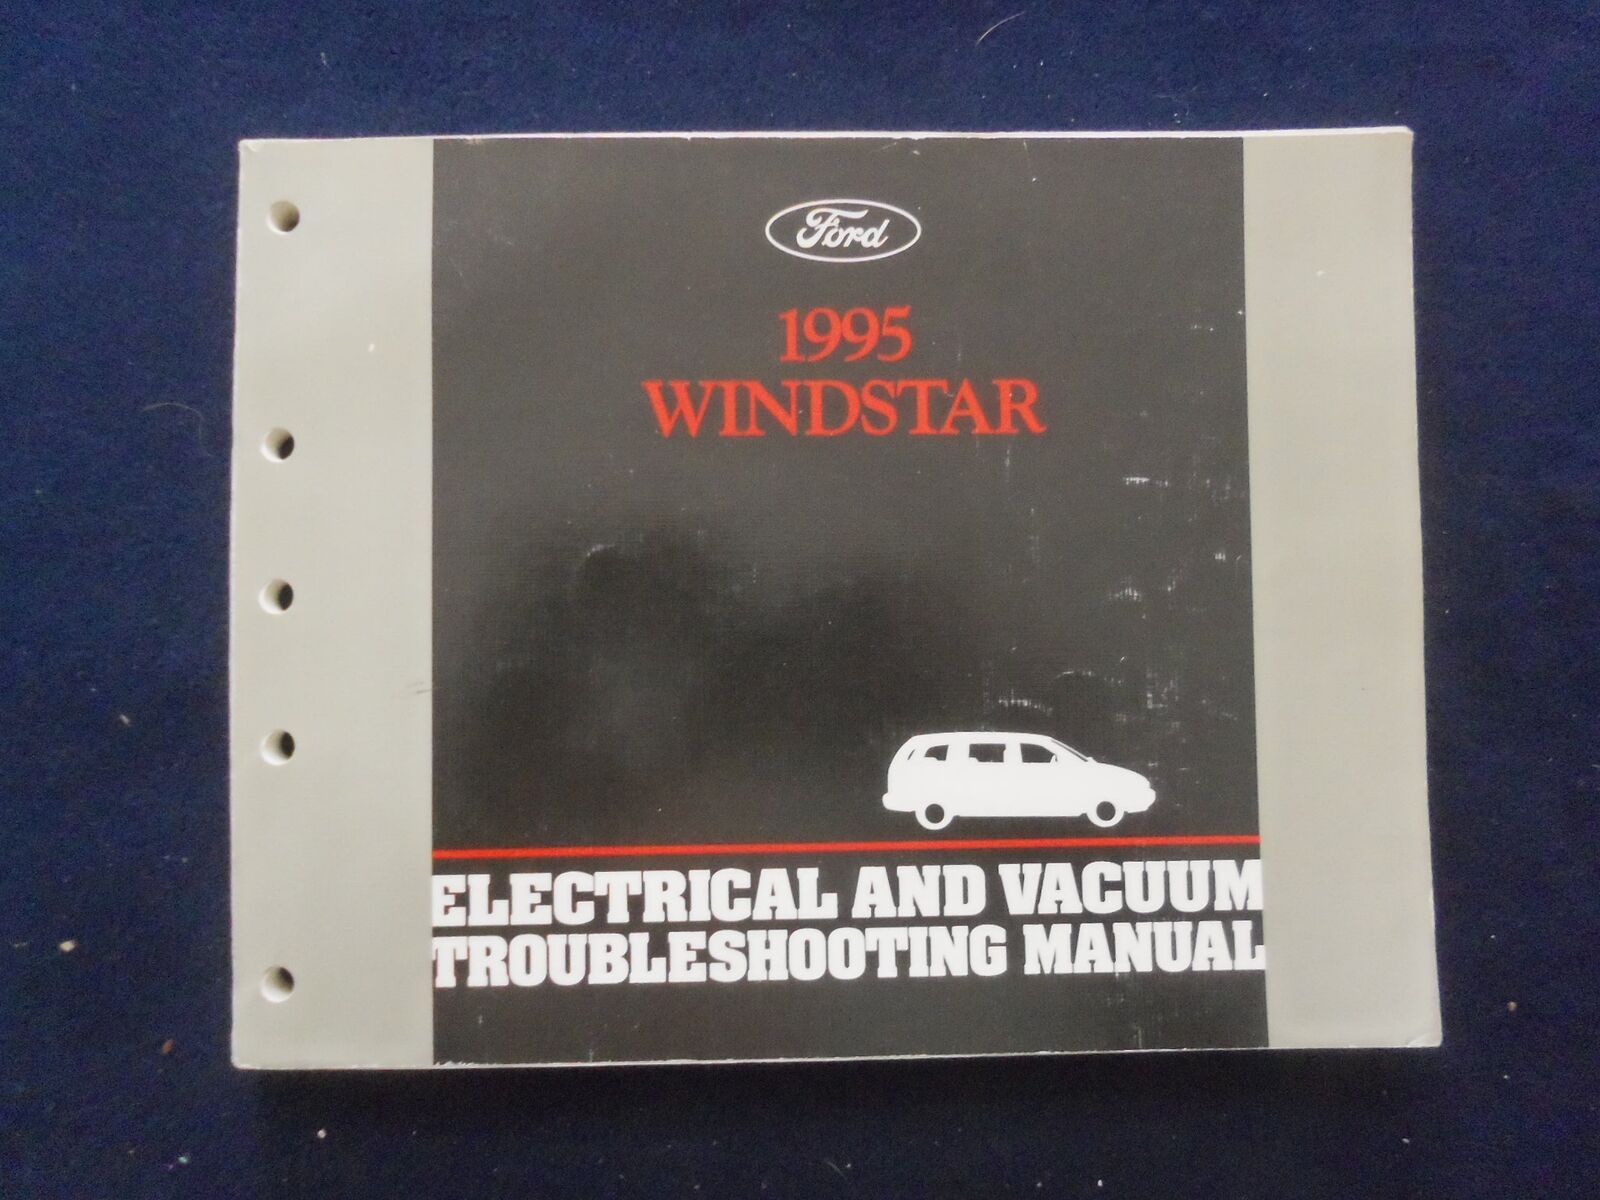 1995 FORD WINDSTAR ELECTRICAL AND VACUUM SOFTCOVER MANUAL - KD 8882